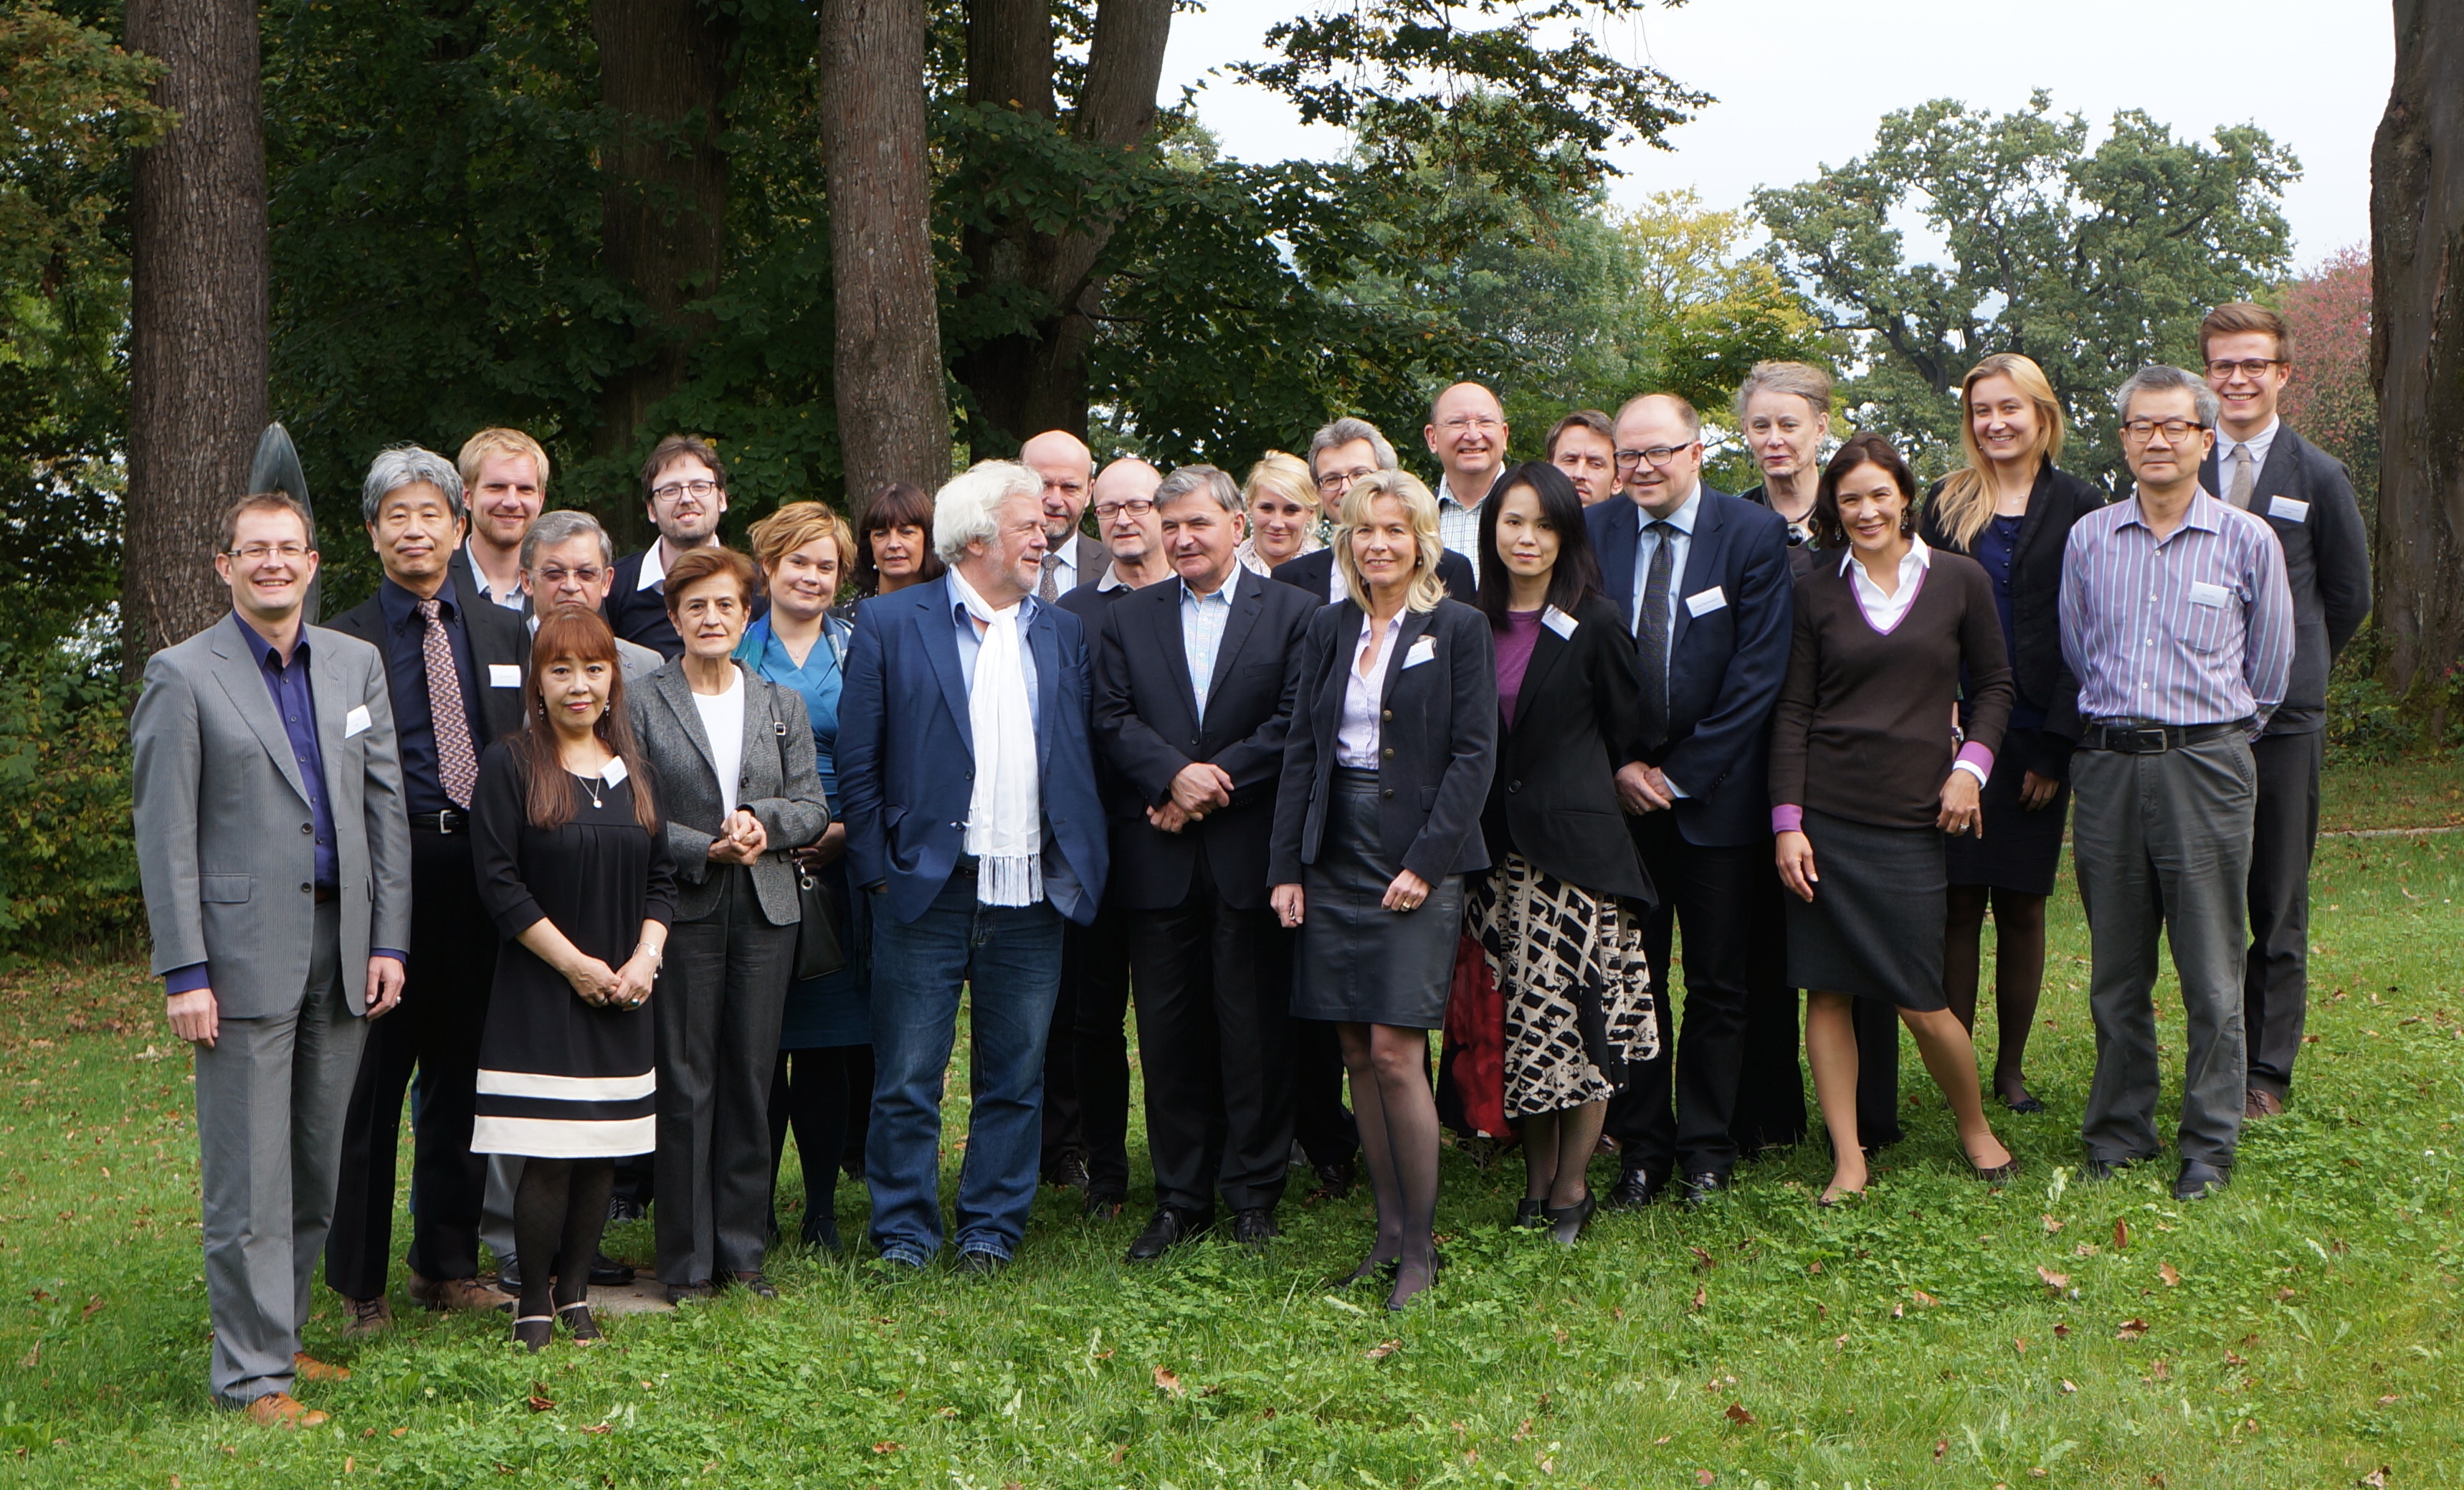 Conference on Business Ethics in Tutzing, 2014